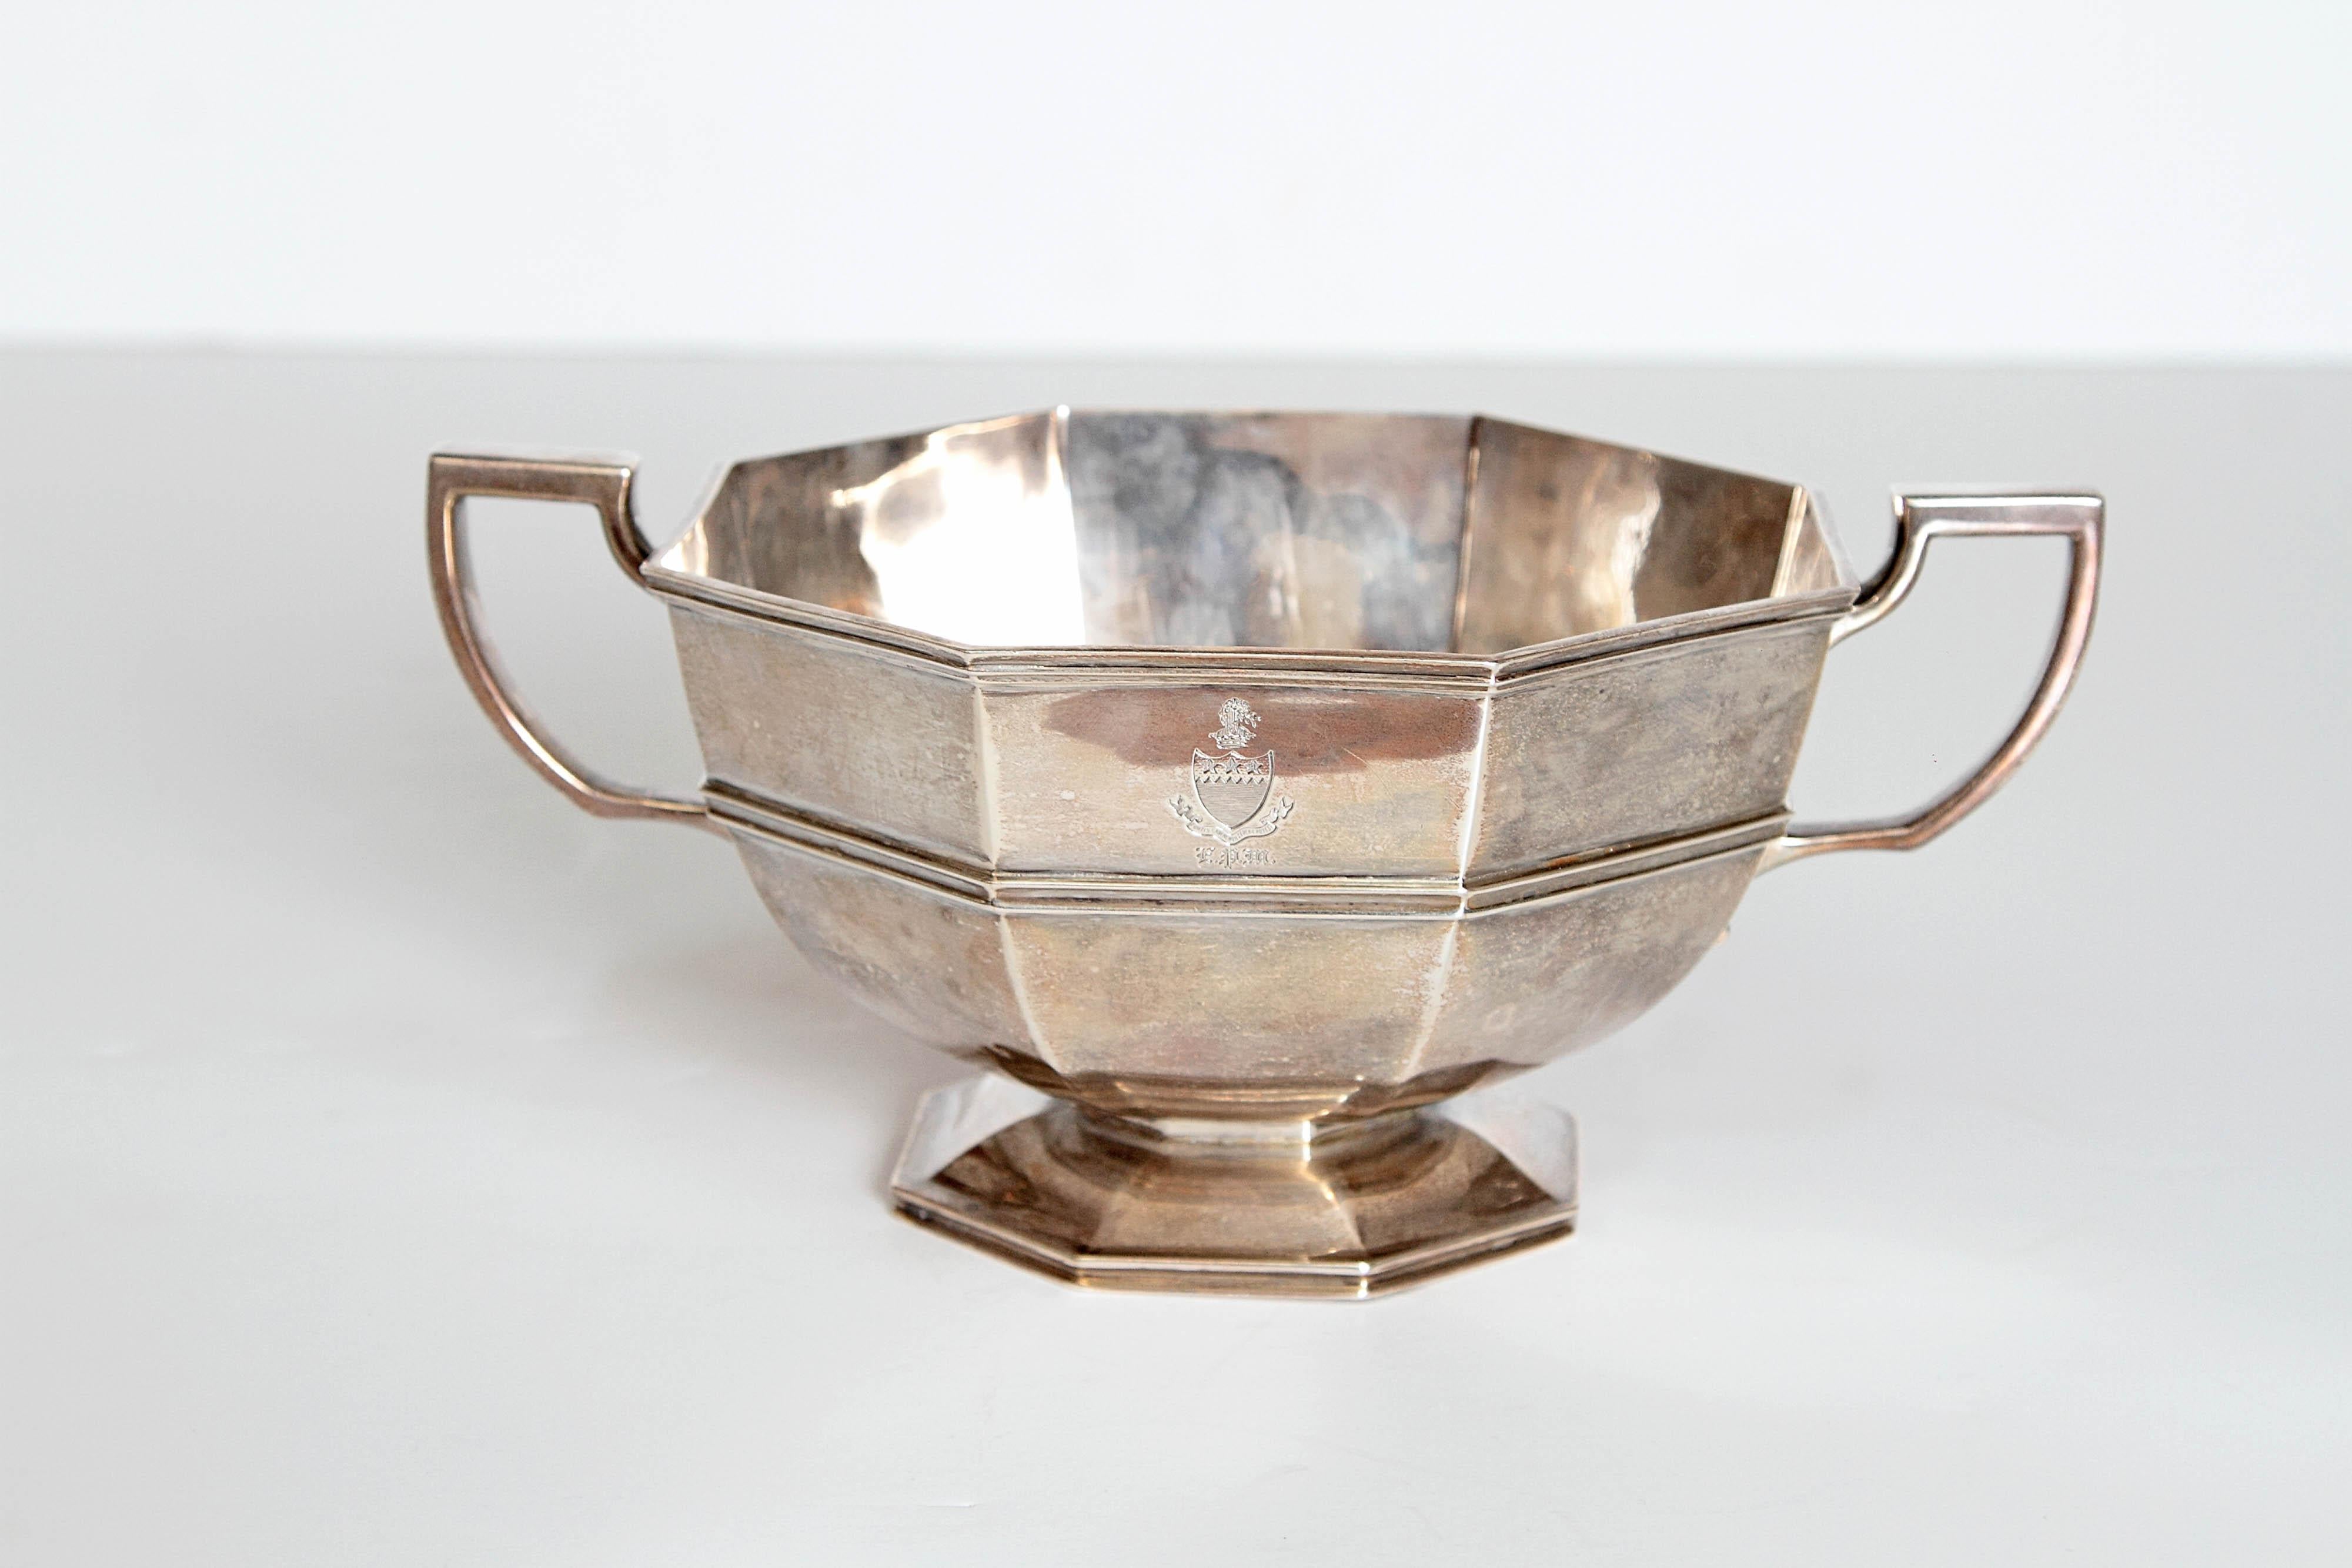 An English Georgian-style sterling silver cup/bowl has an octagonal paneled and rounded form to a spreading pedestal foot. The surface is plain with a cord decoration and incising at top. The underside bears the retailer's mark. Marked made in